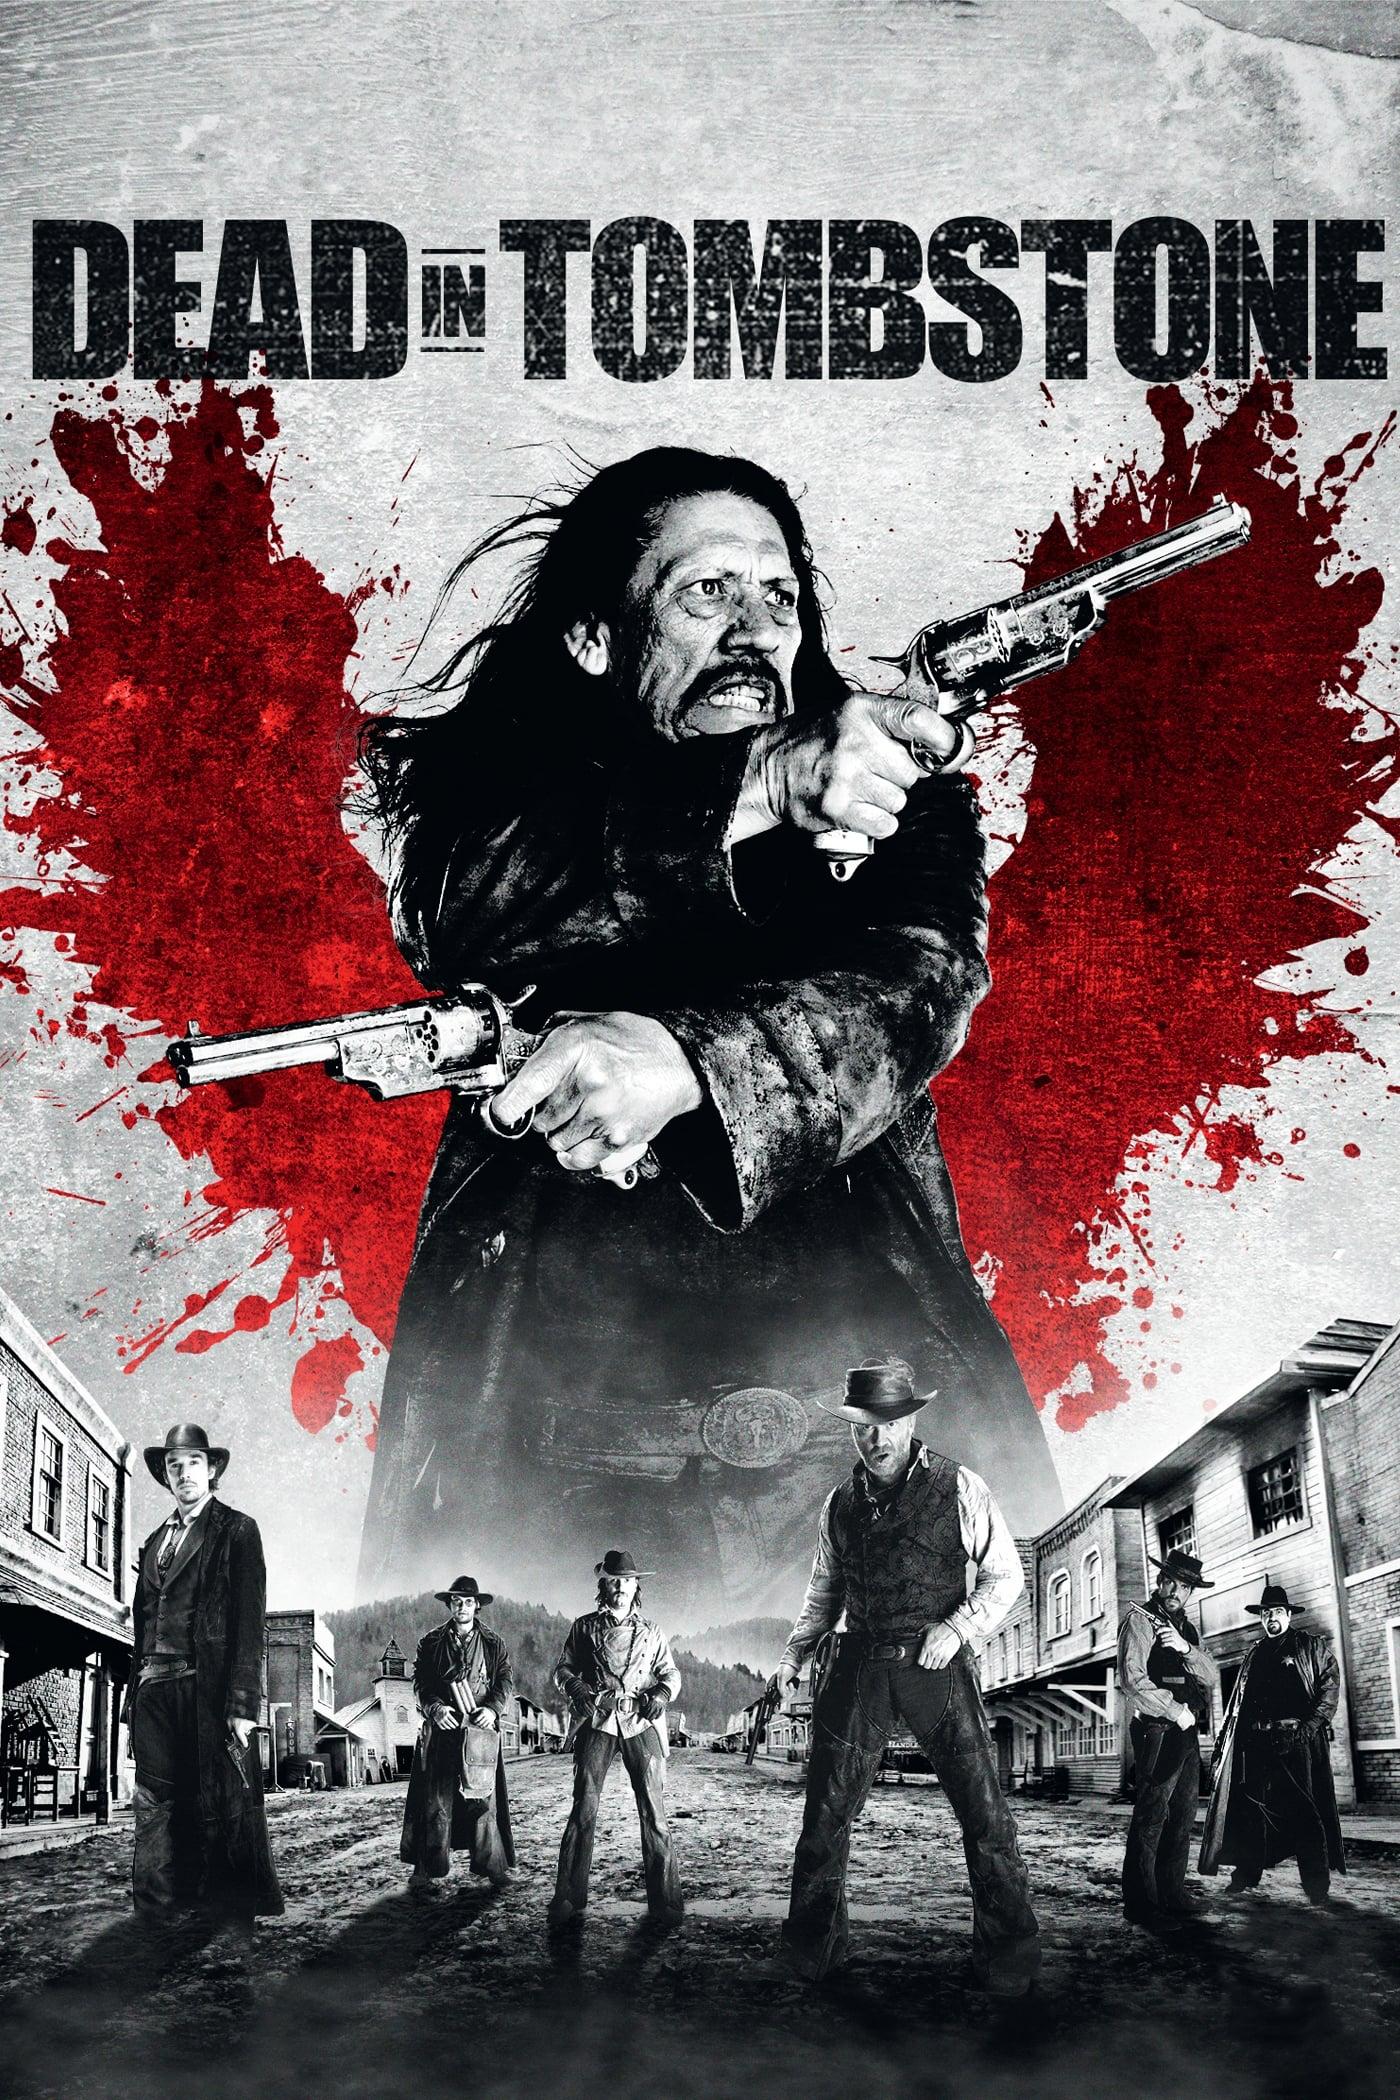 Dead in Tombstone poster